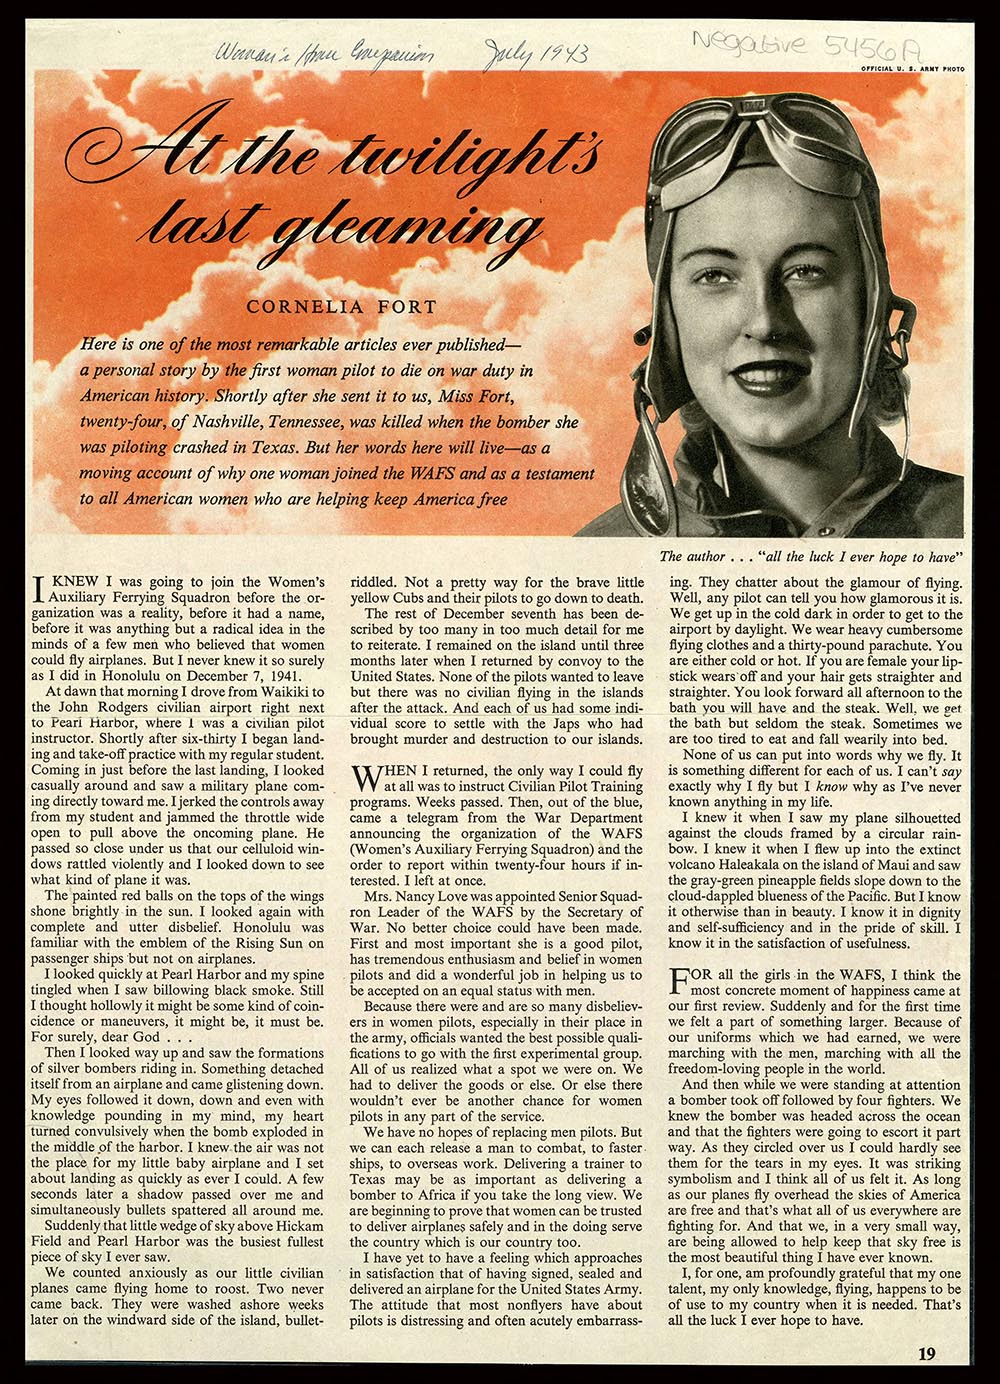 Cornelia Fort wrote this article describing her experience the day Pearl Harbor was bombed